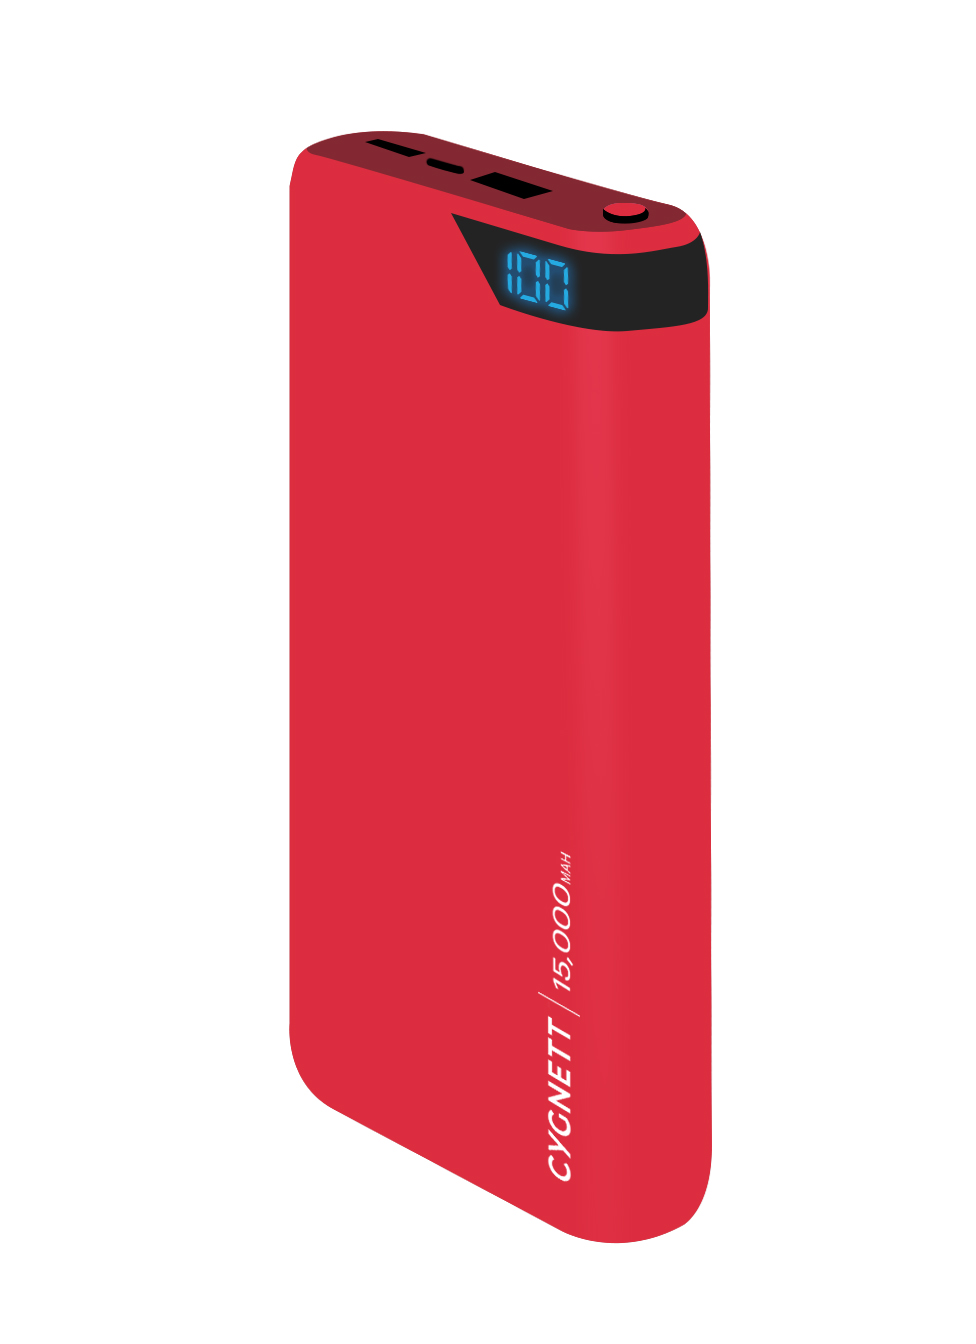 Cygnett ChargeUp Boost 15000mAh Red Power Bank